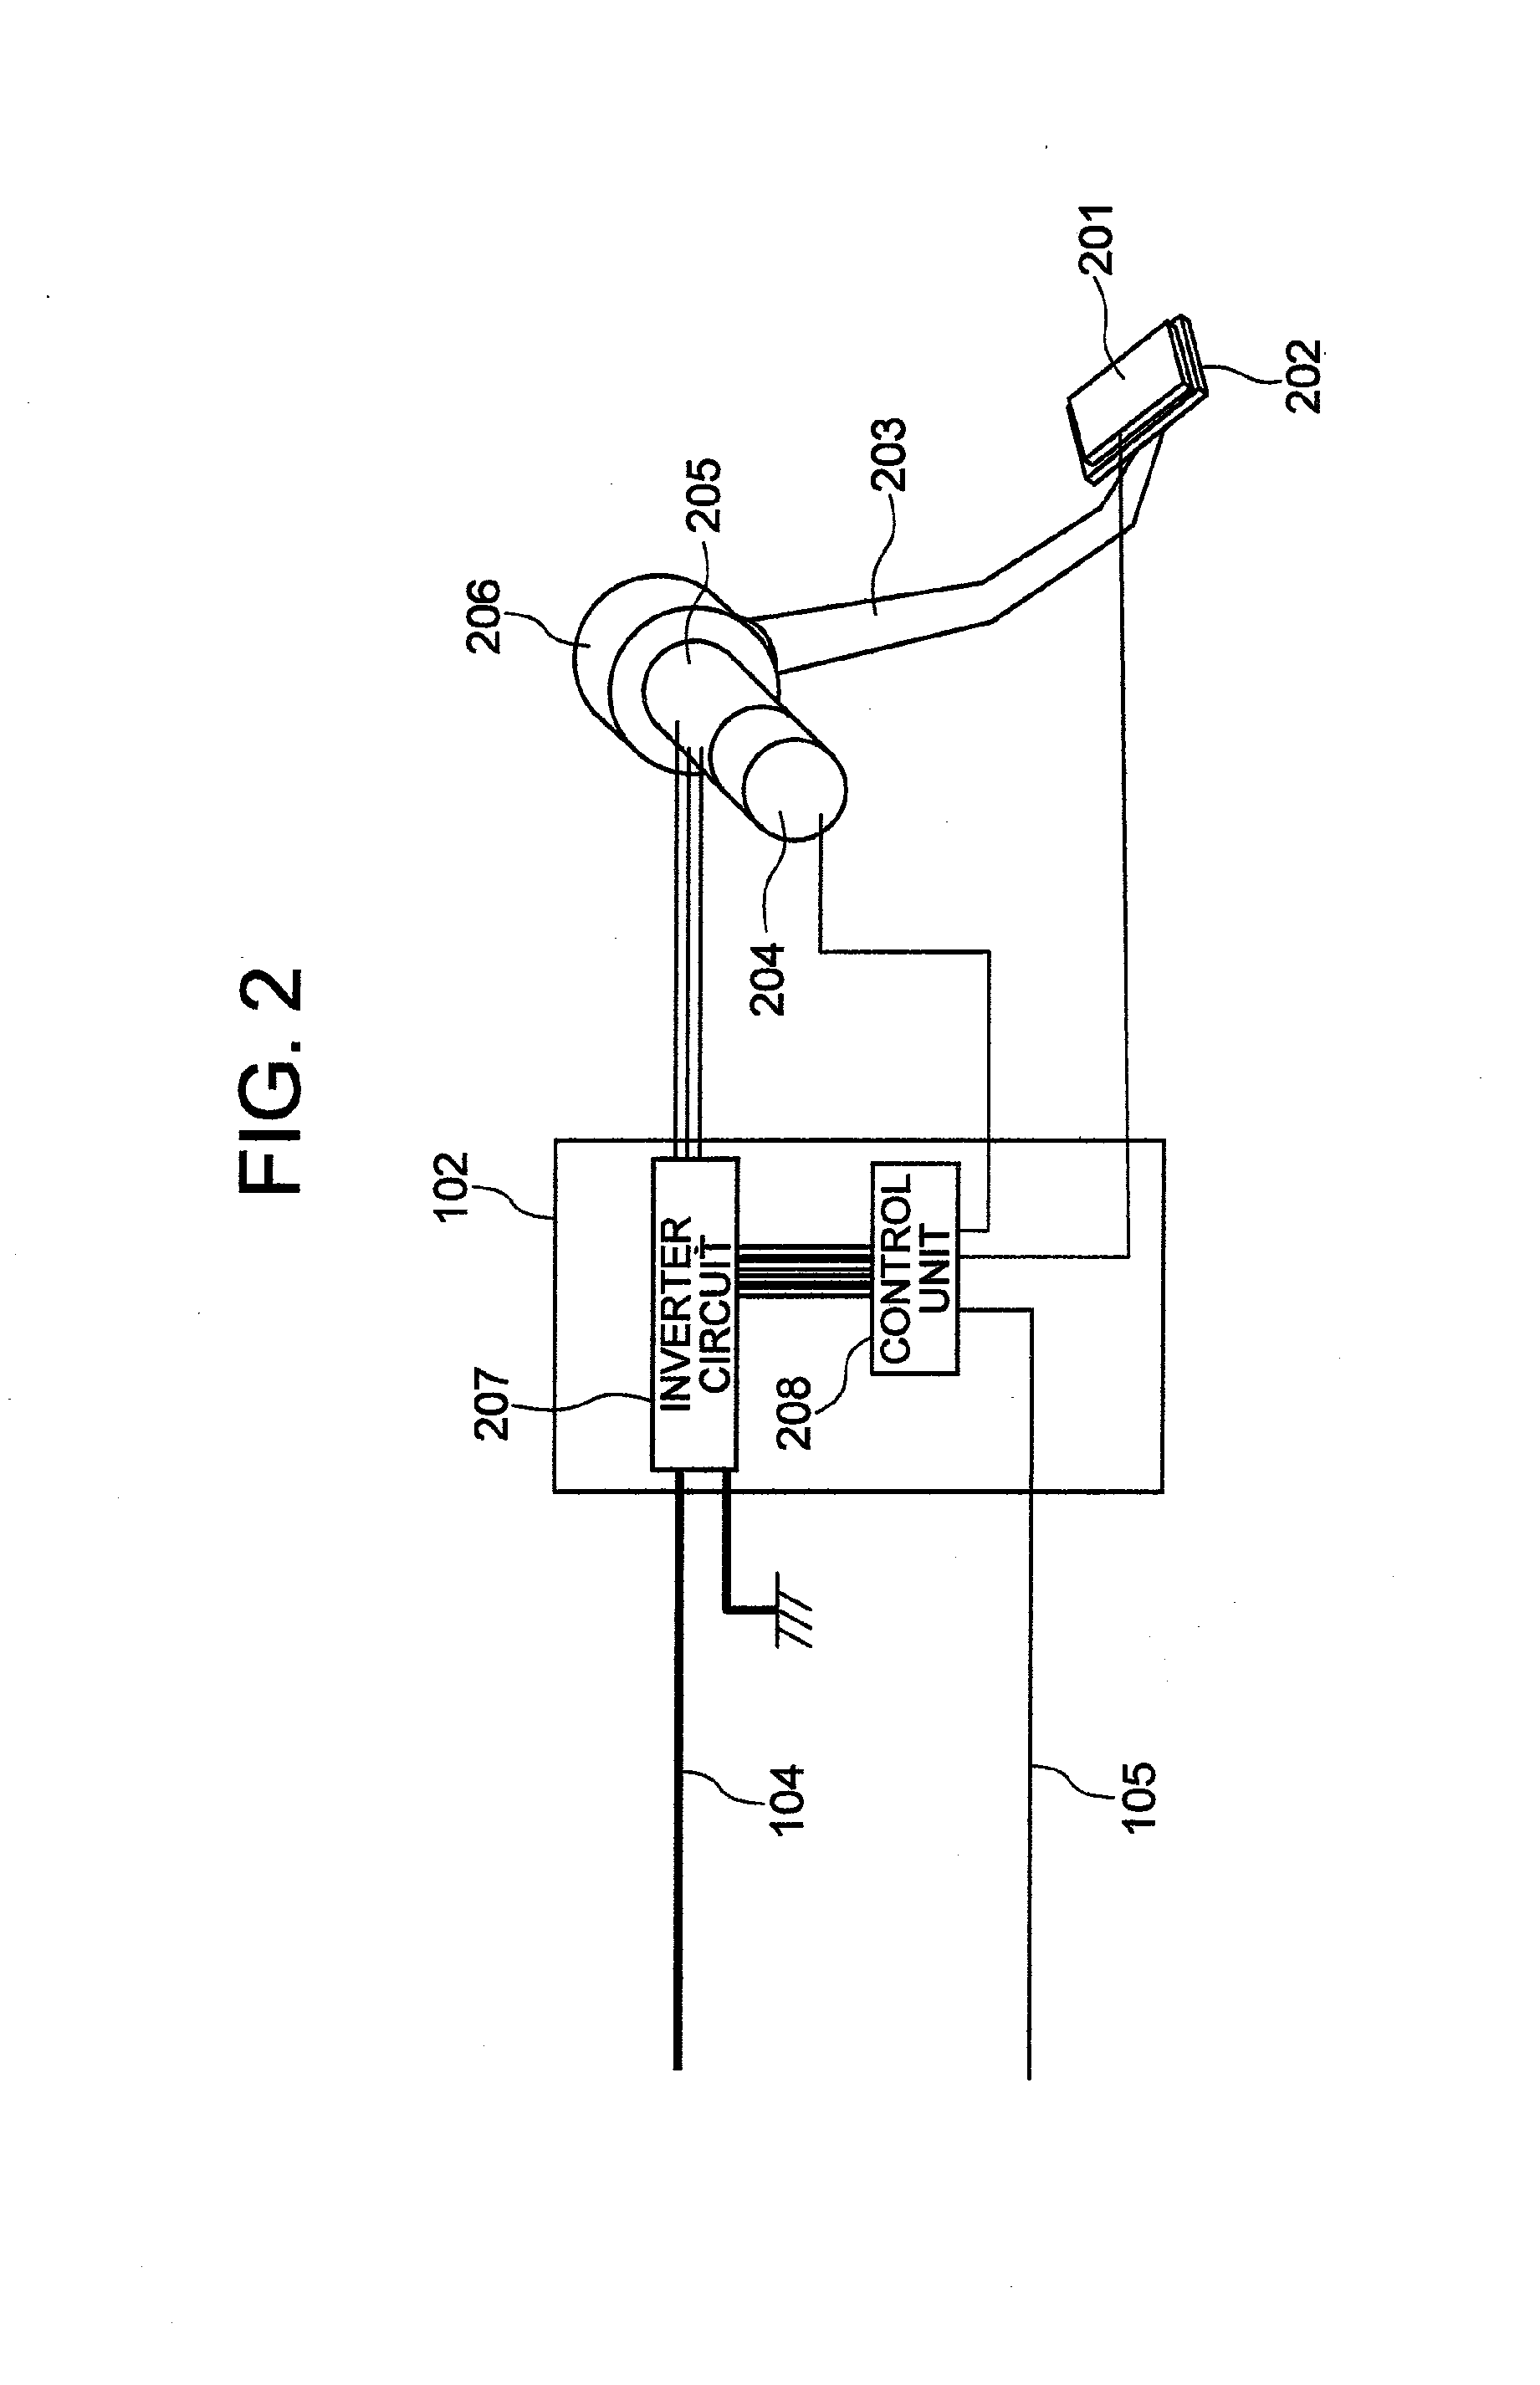 On-vehicle actuator system